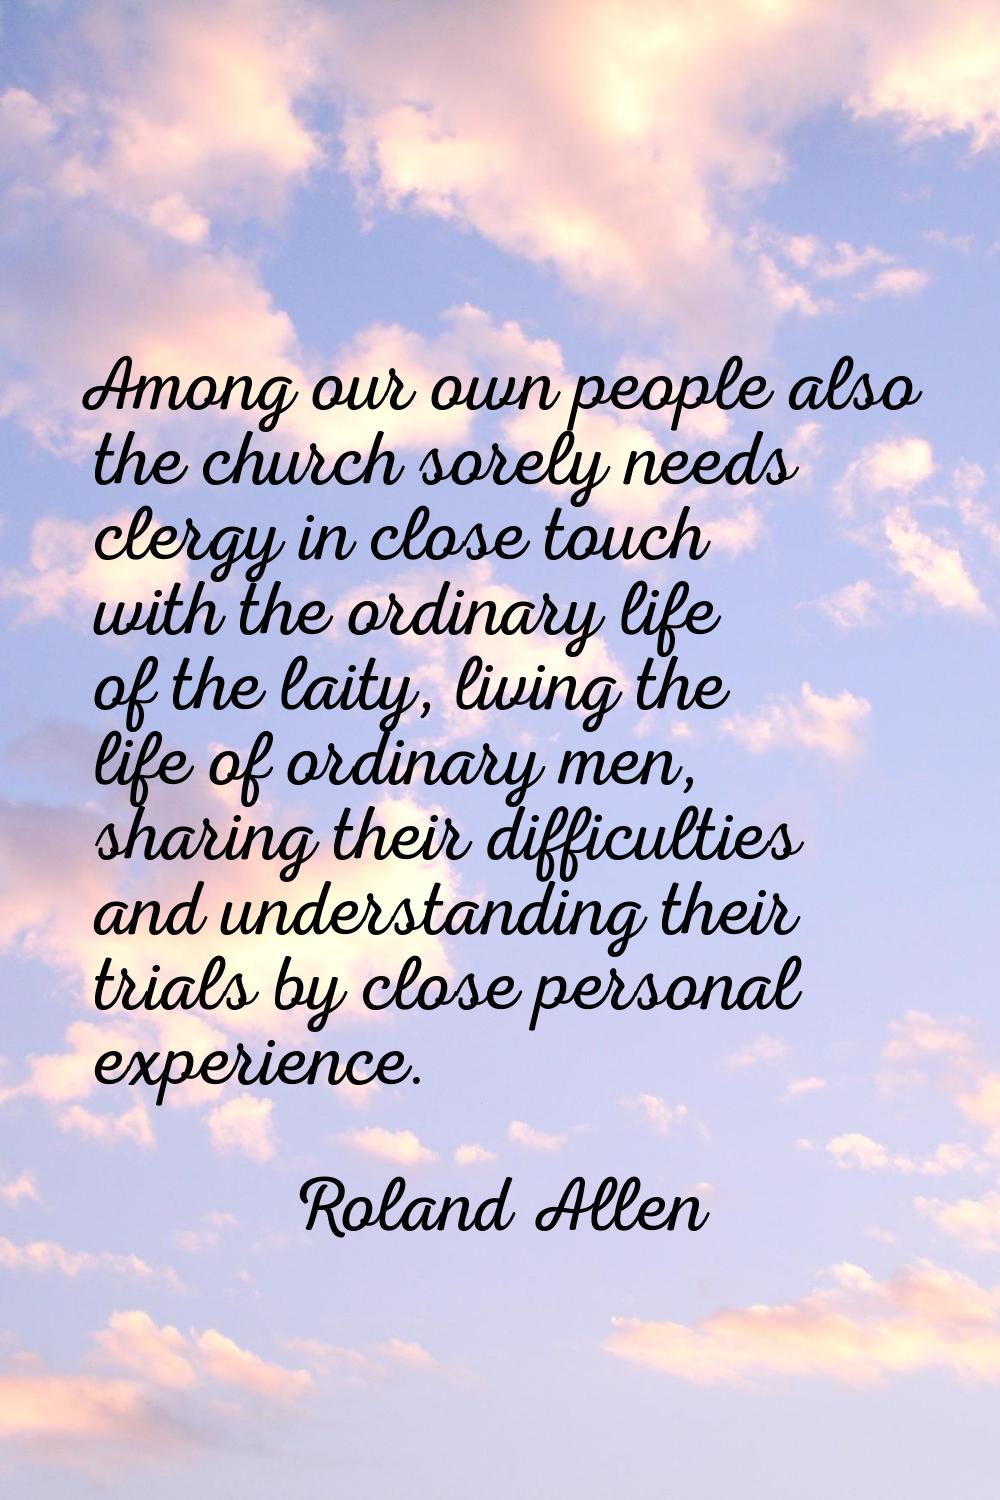 Among our own people also the church sorely needs clergy in close touch with the ordinary life of t